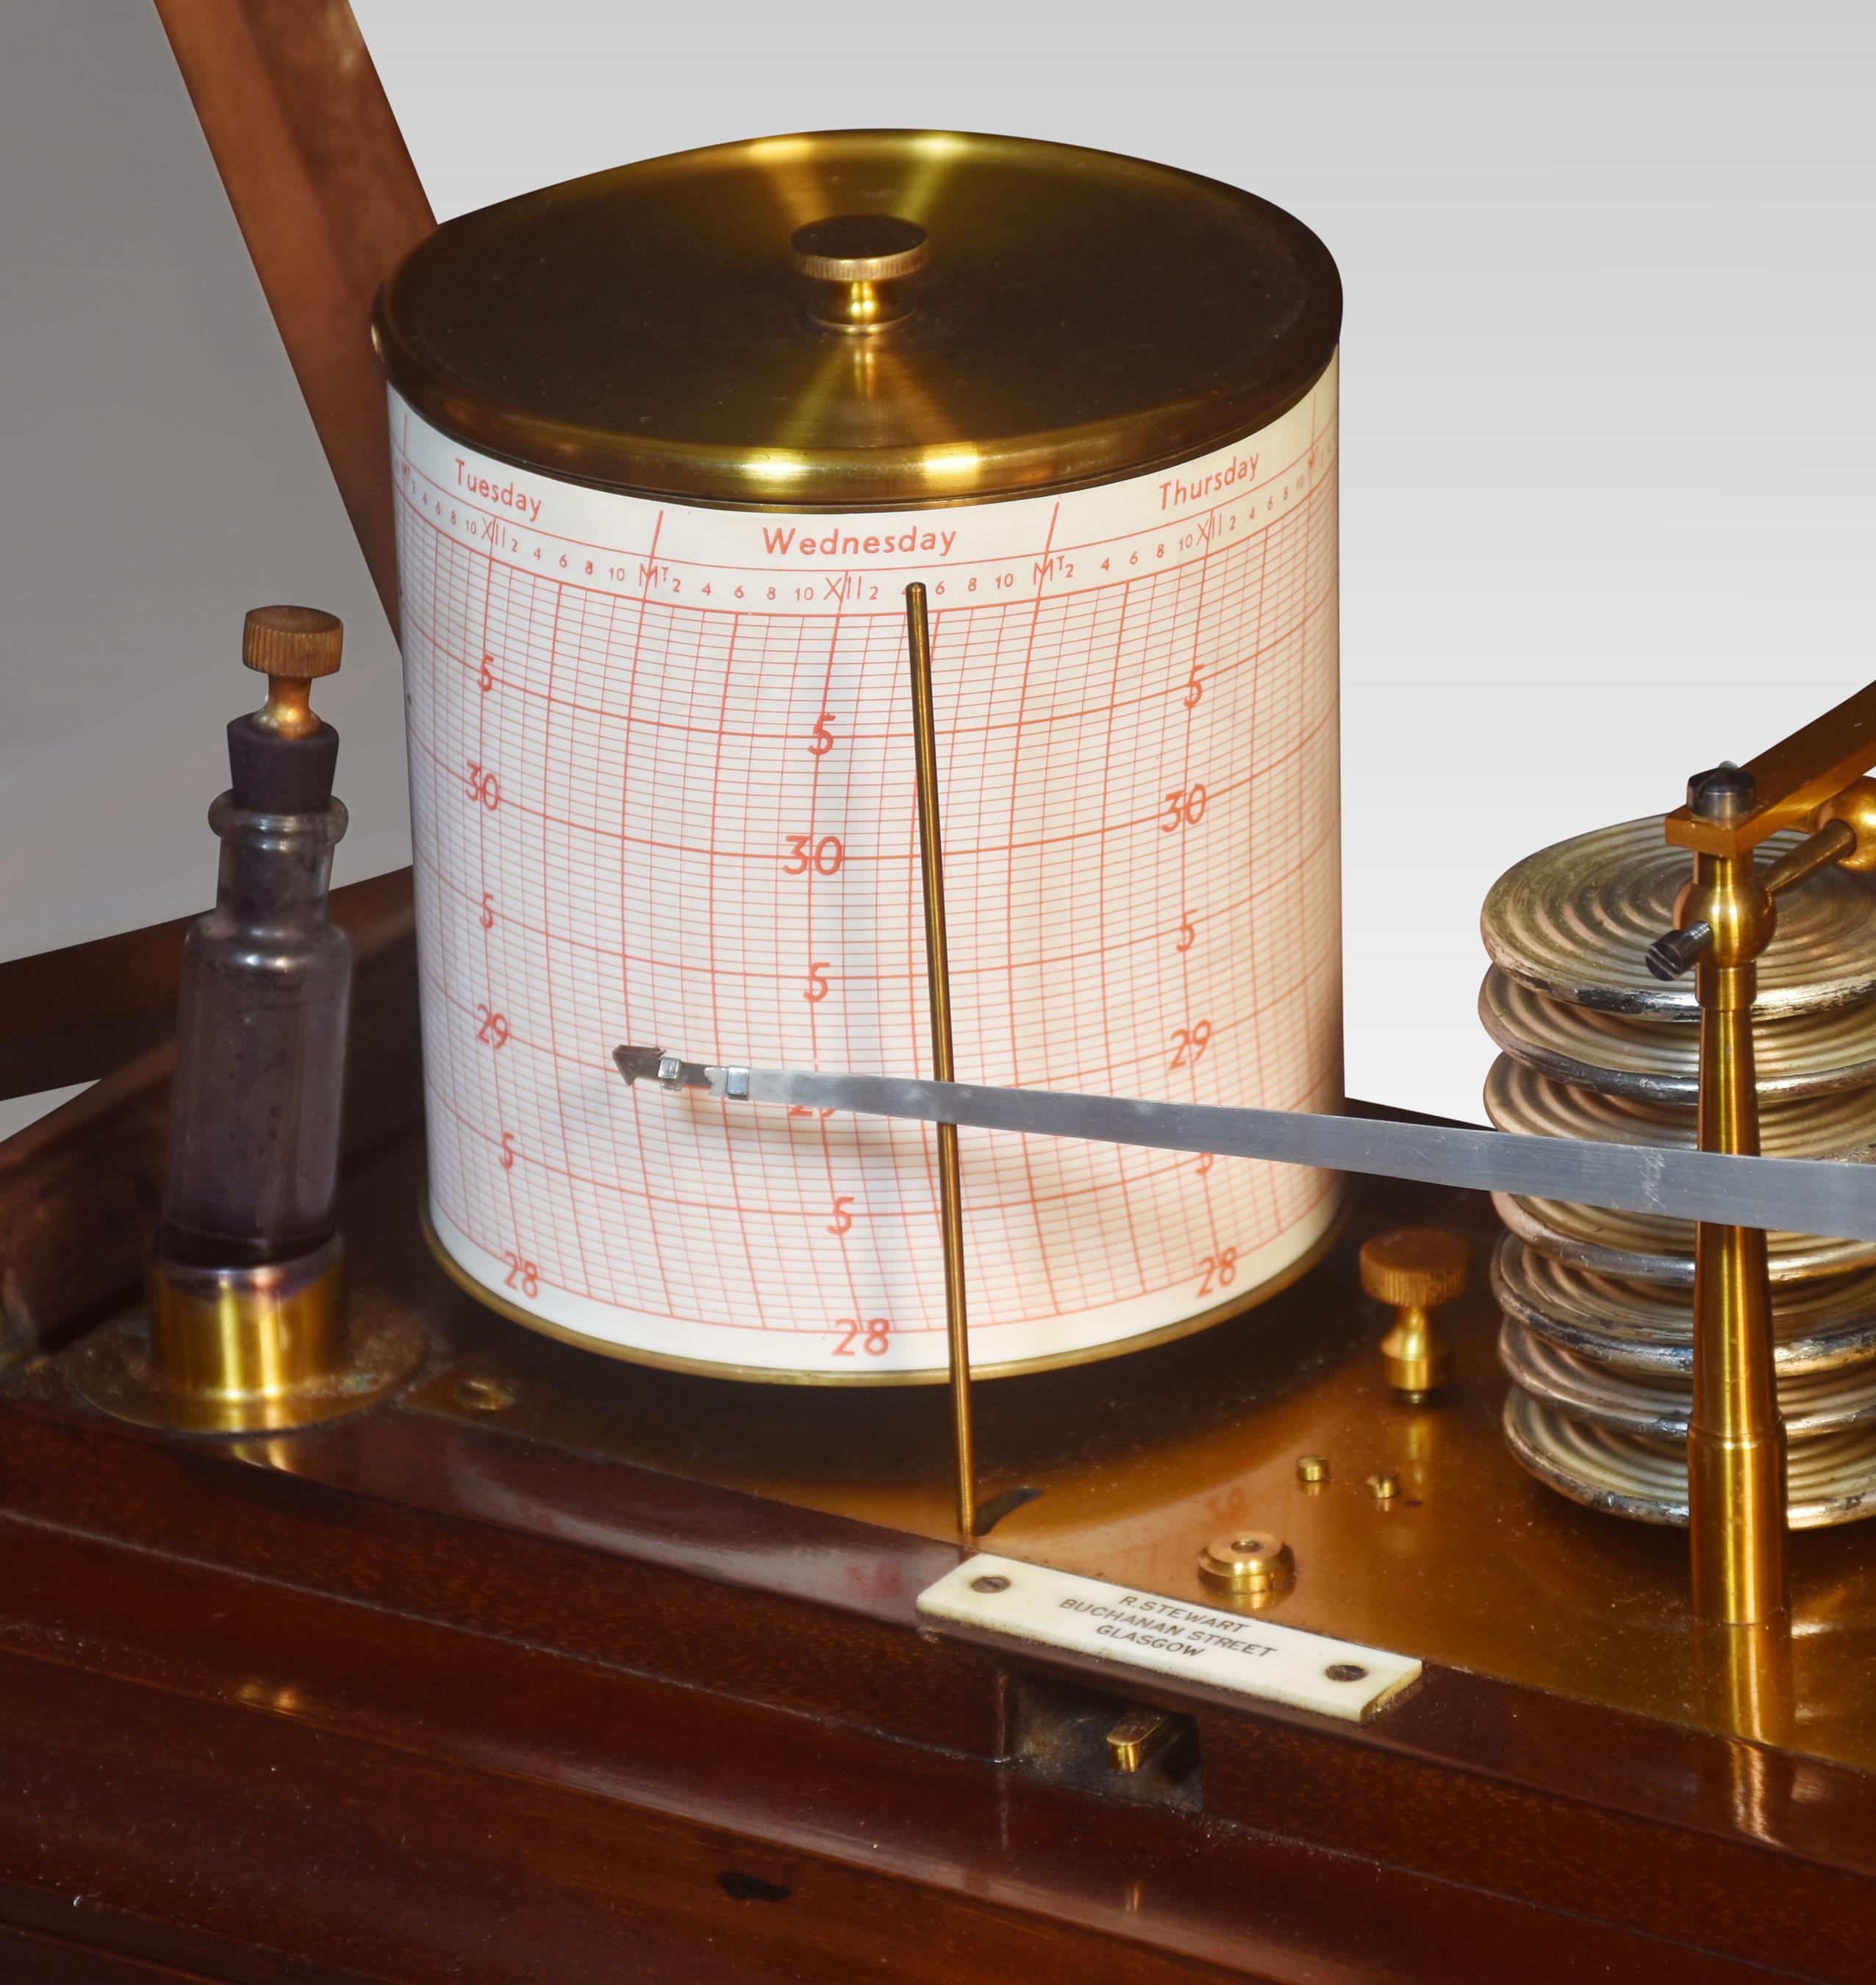 R. Stewart mahogany-cased Barograph, having five glazed hinged lid, and a drawer below to house the charts. The mechanical eight-day movement is housed in the drum, fitted with a seven-day chart that covers one full rotation of the drum. The ink